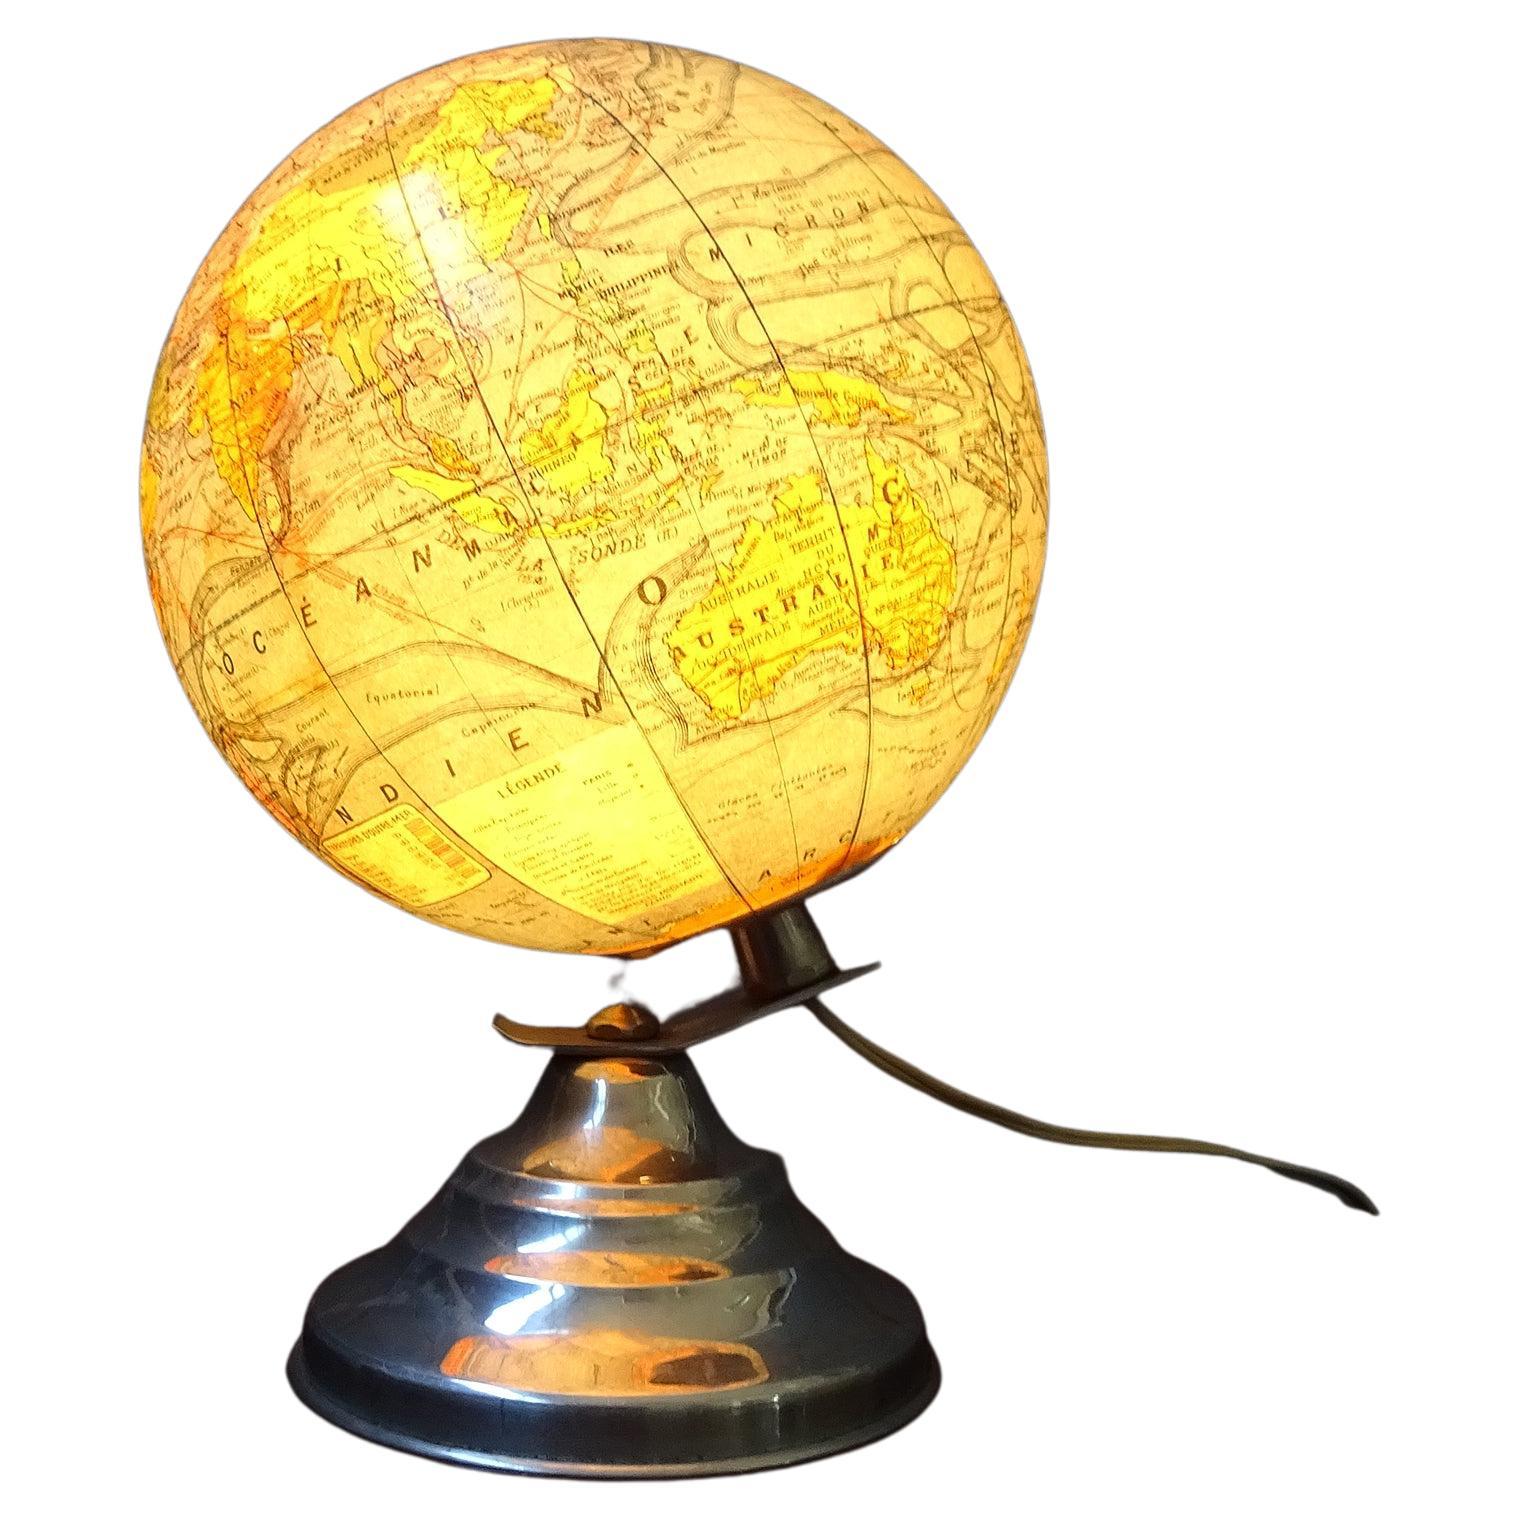 French globe by Girard Barrère & Thomas. This small glowing glass globe was made before 1948. Typical Art Deco design on a step-shaped base made of aluminum and a globe made of glass.